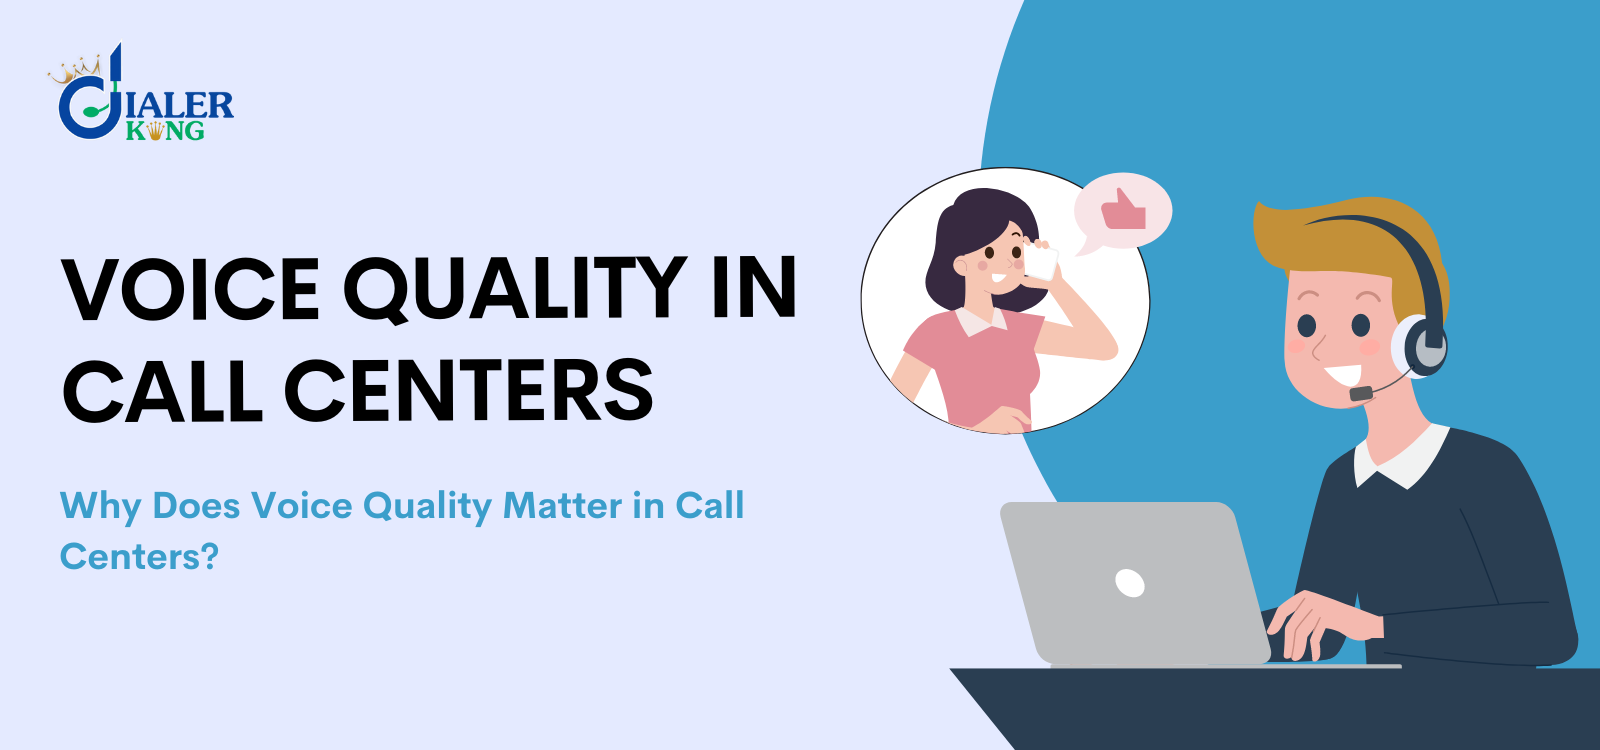 Voice Quality in Call Centers